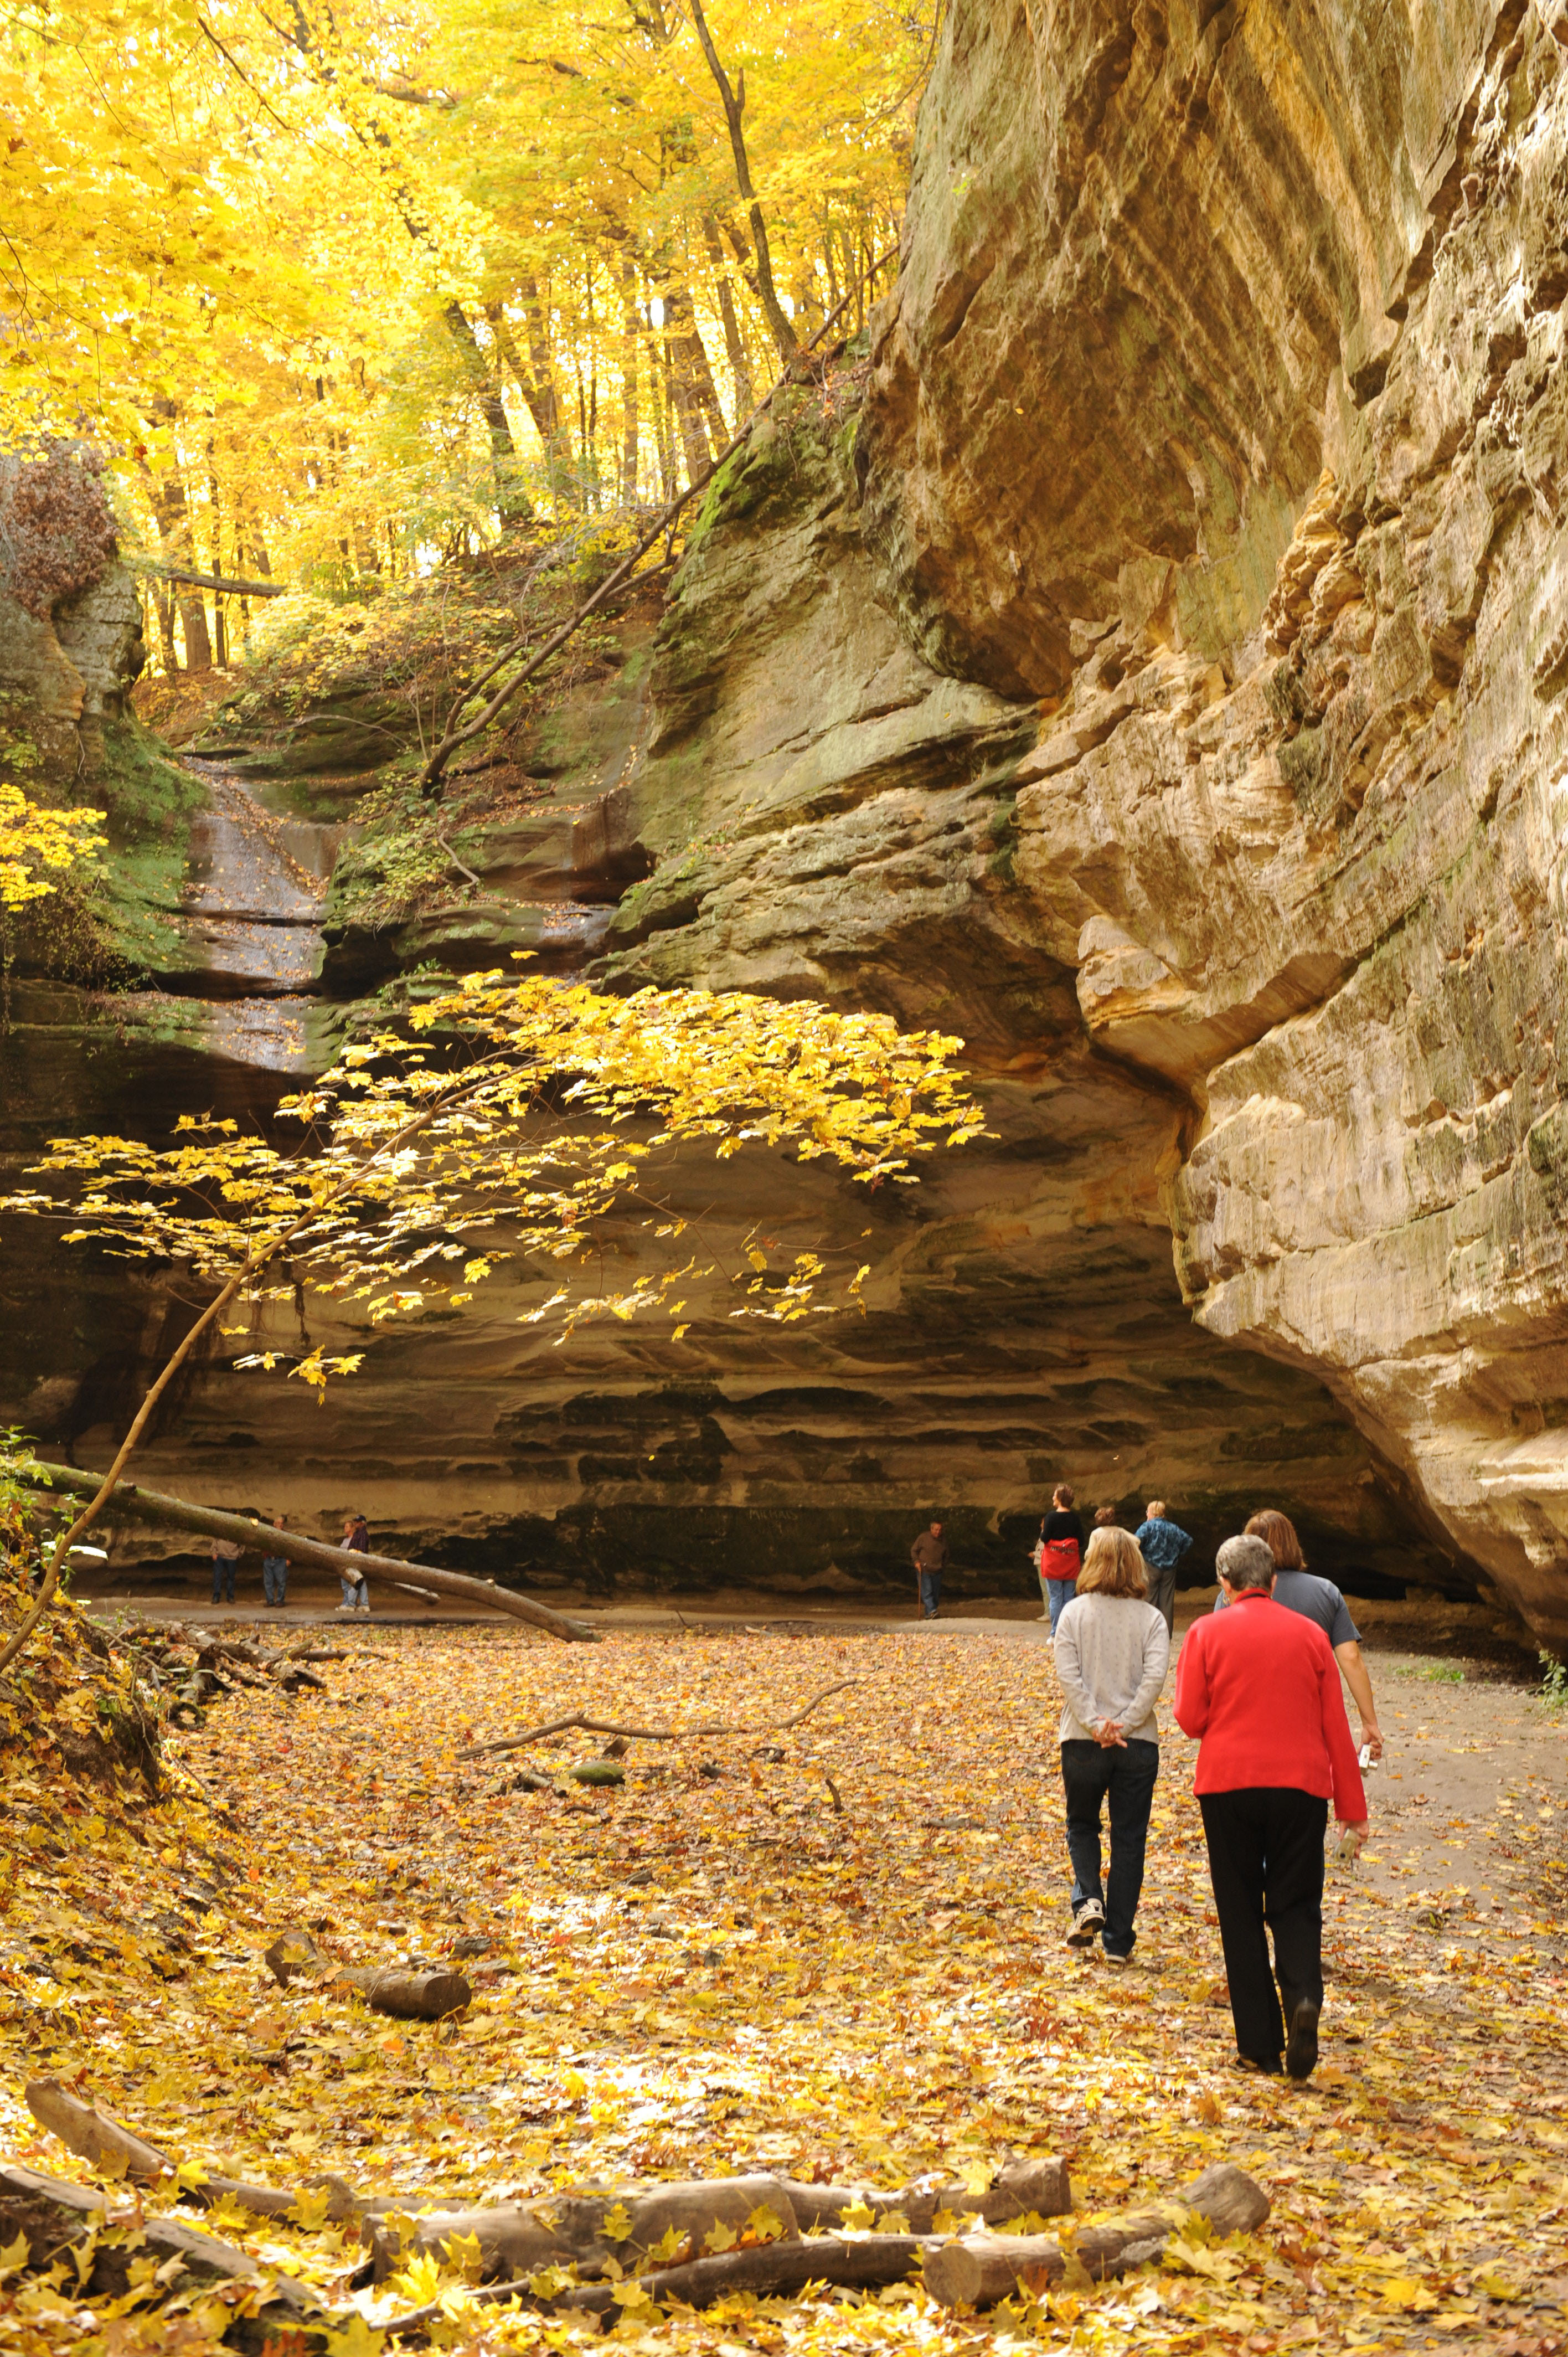 Group hiking in Starved Rock State Park